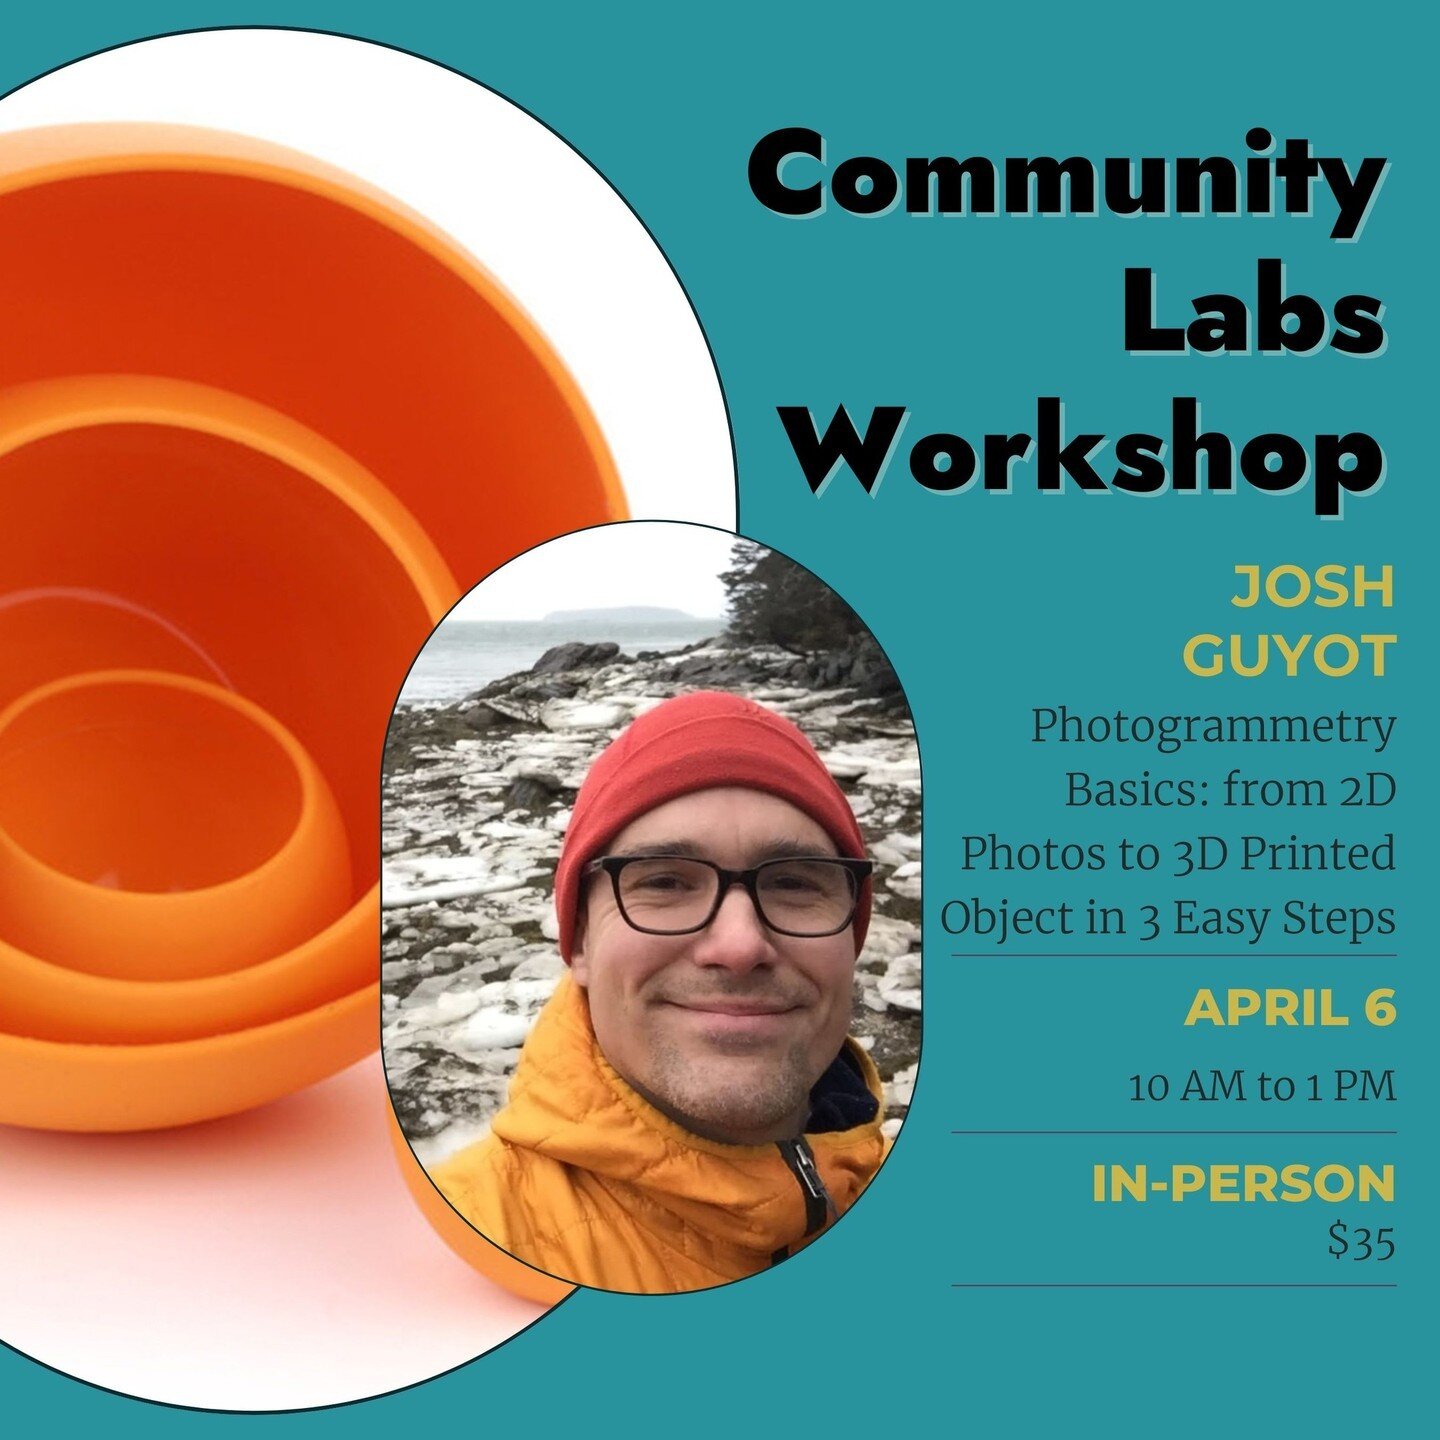 Our next Community Labs Workshop hits right at the sweet spot of craft and tech with Josh Guyot&rsquo;s Photogrammetry Basics; From 2D Photos to 3D Printed Objects in 3 Easy Steps workshop!⁠
⁠
Photogrammetry is the process of taking 3D info from 2D i